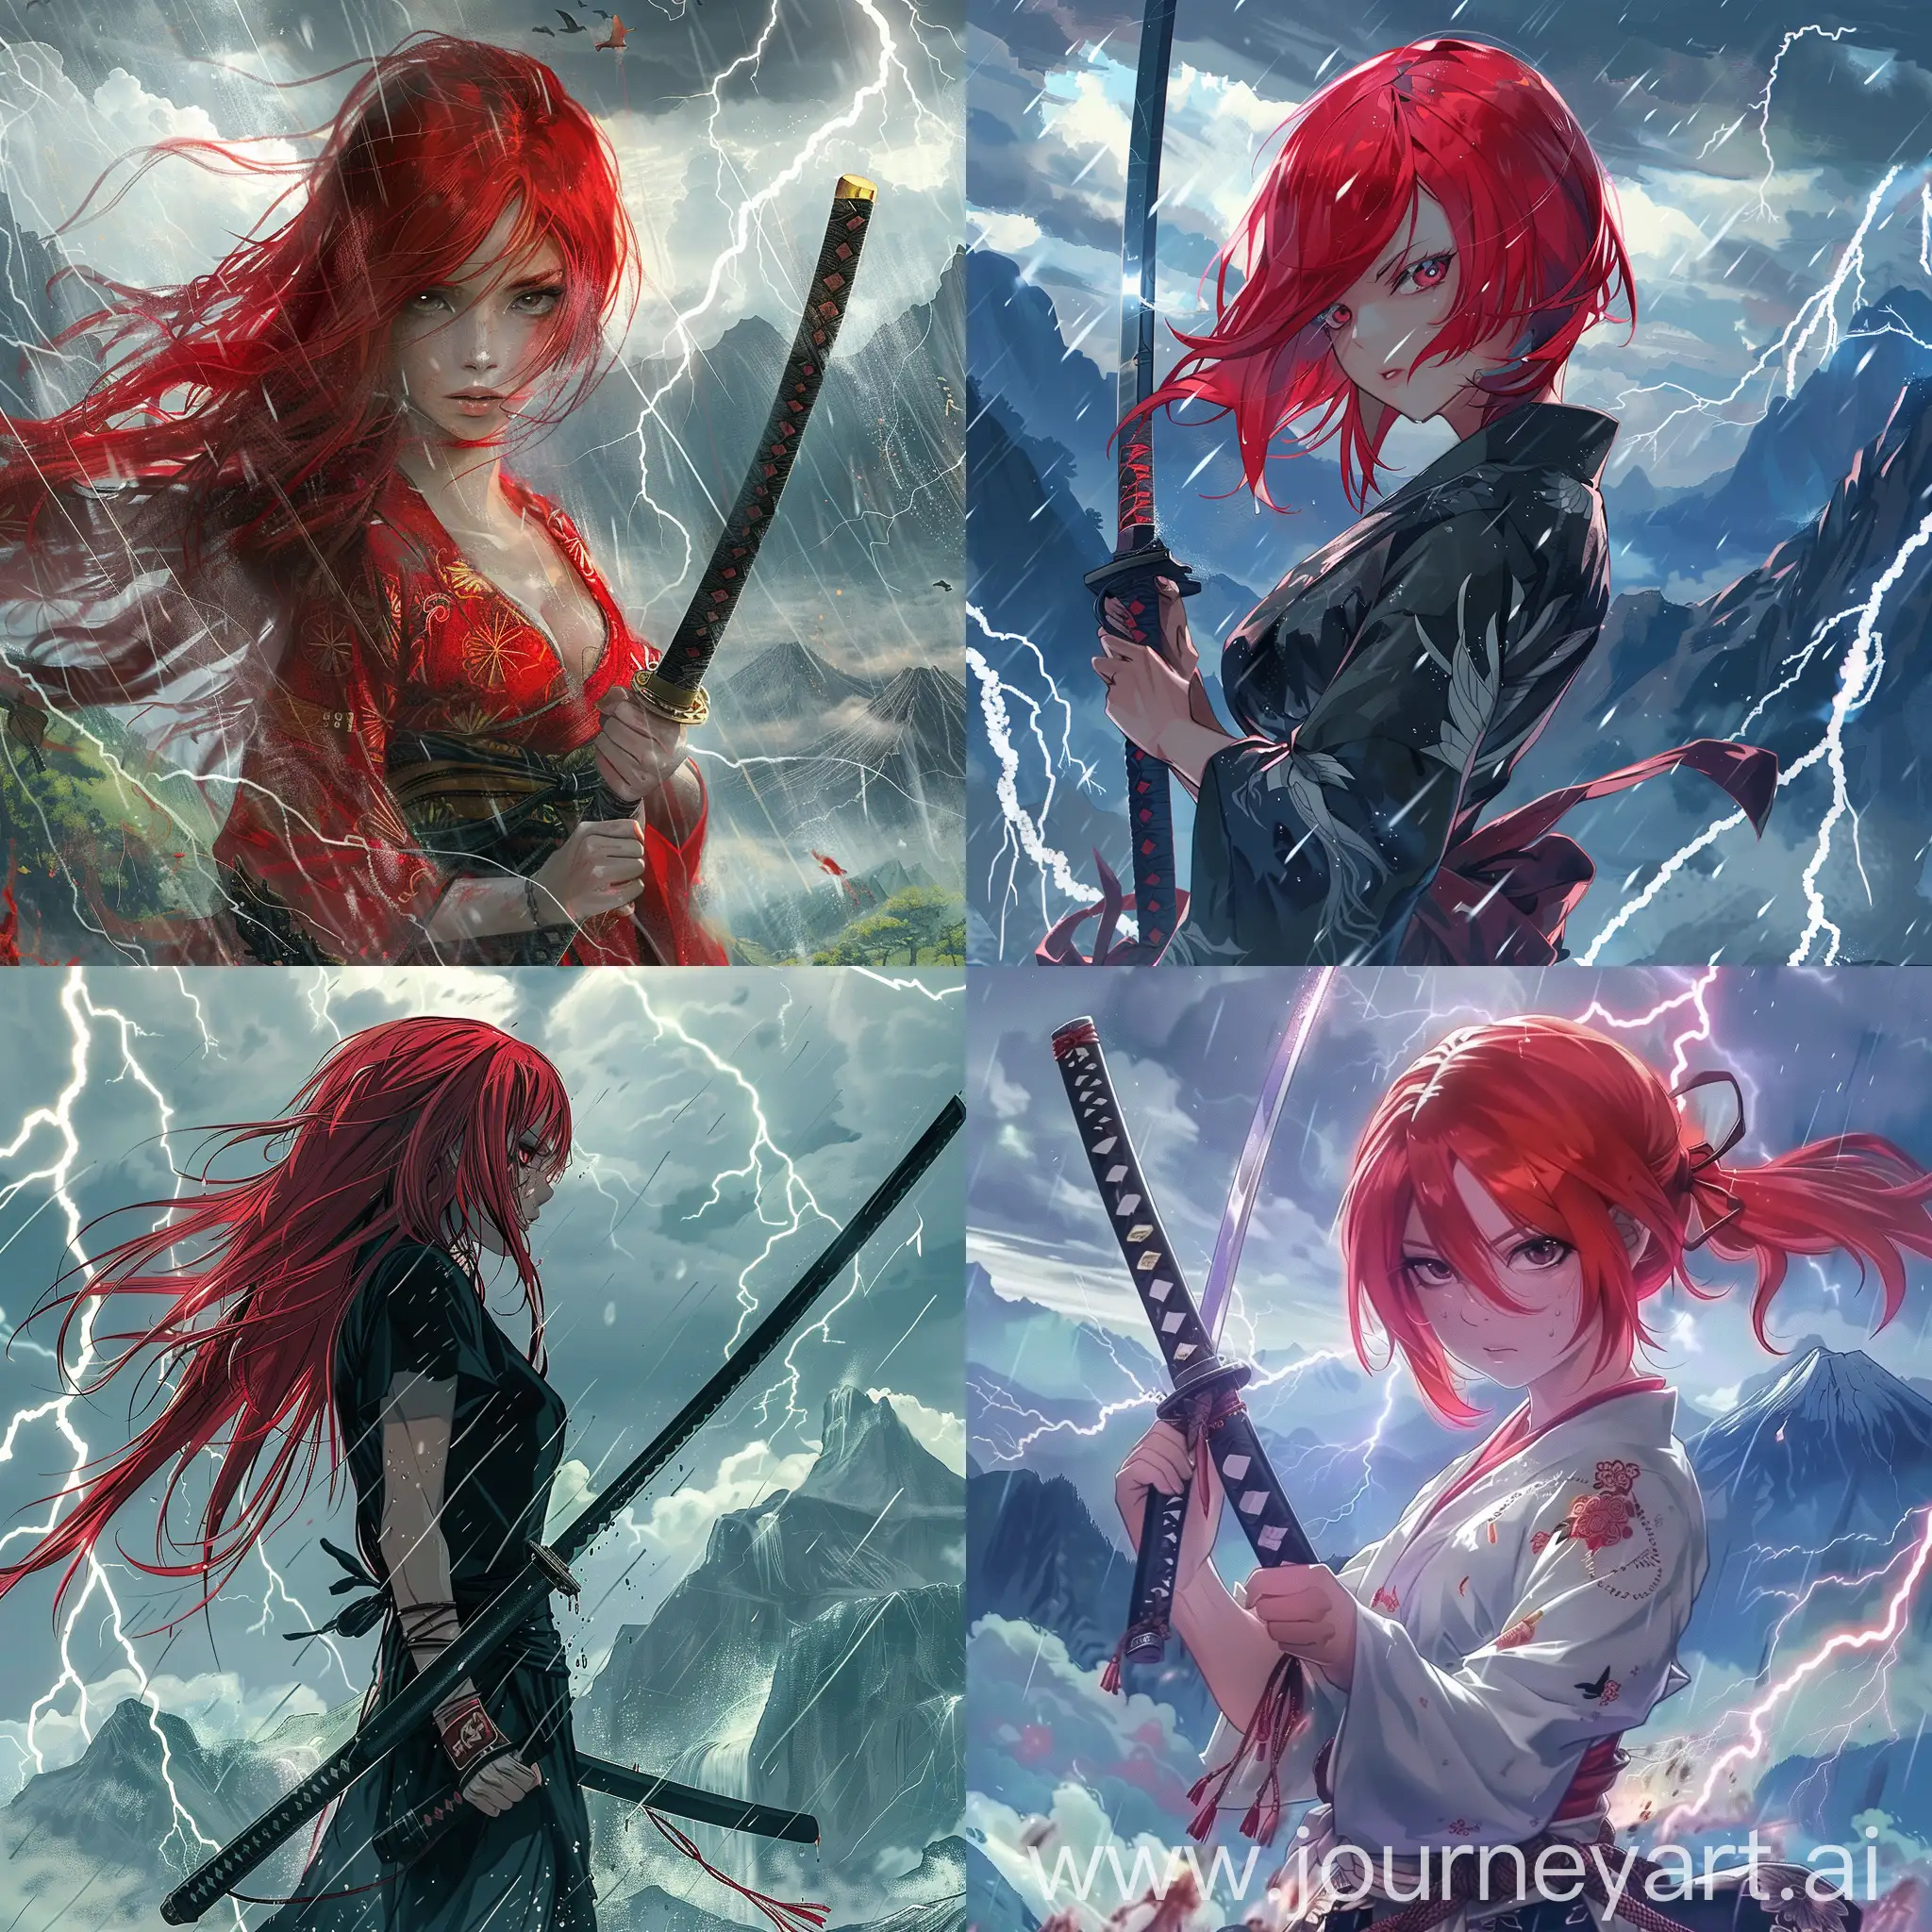 RedHaired-Anime-Warrior-with-Katana-Amidst-Mountain-Thunderstorm